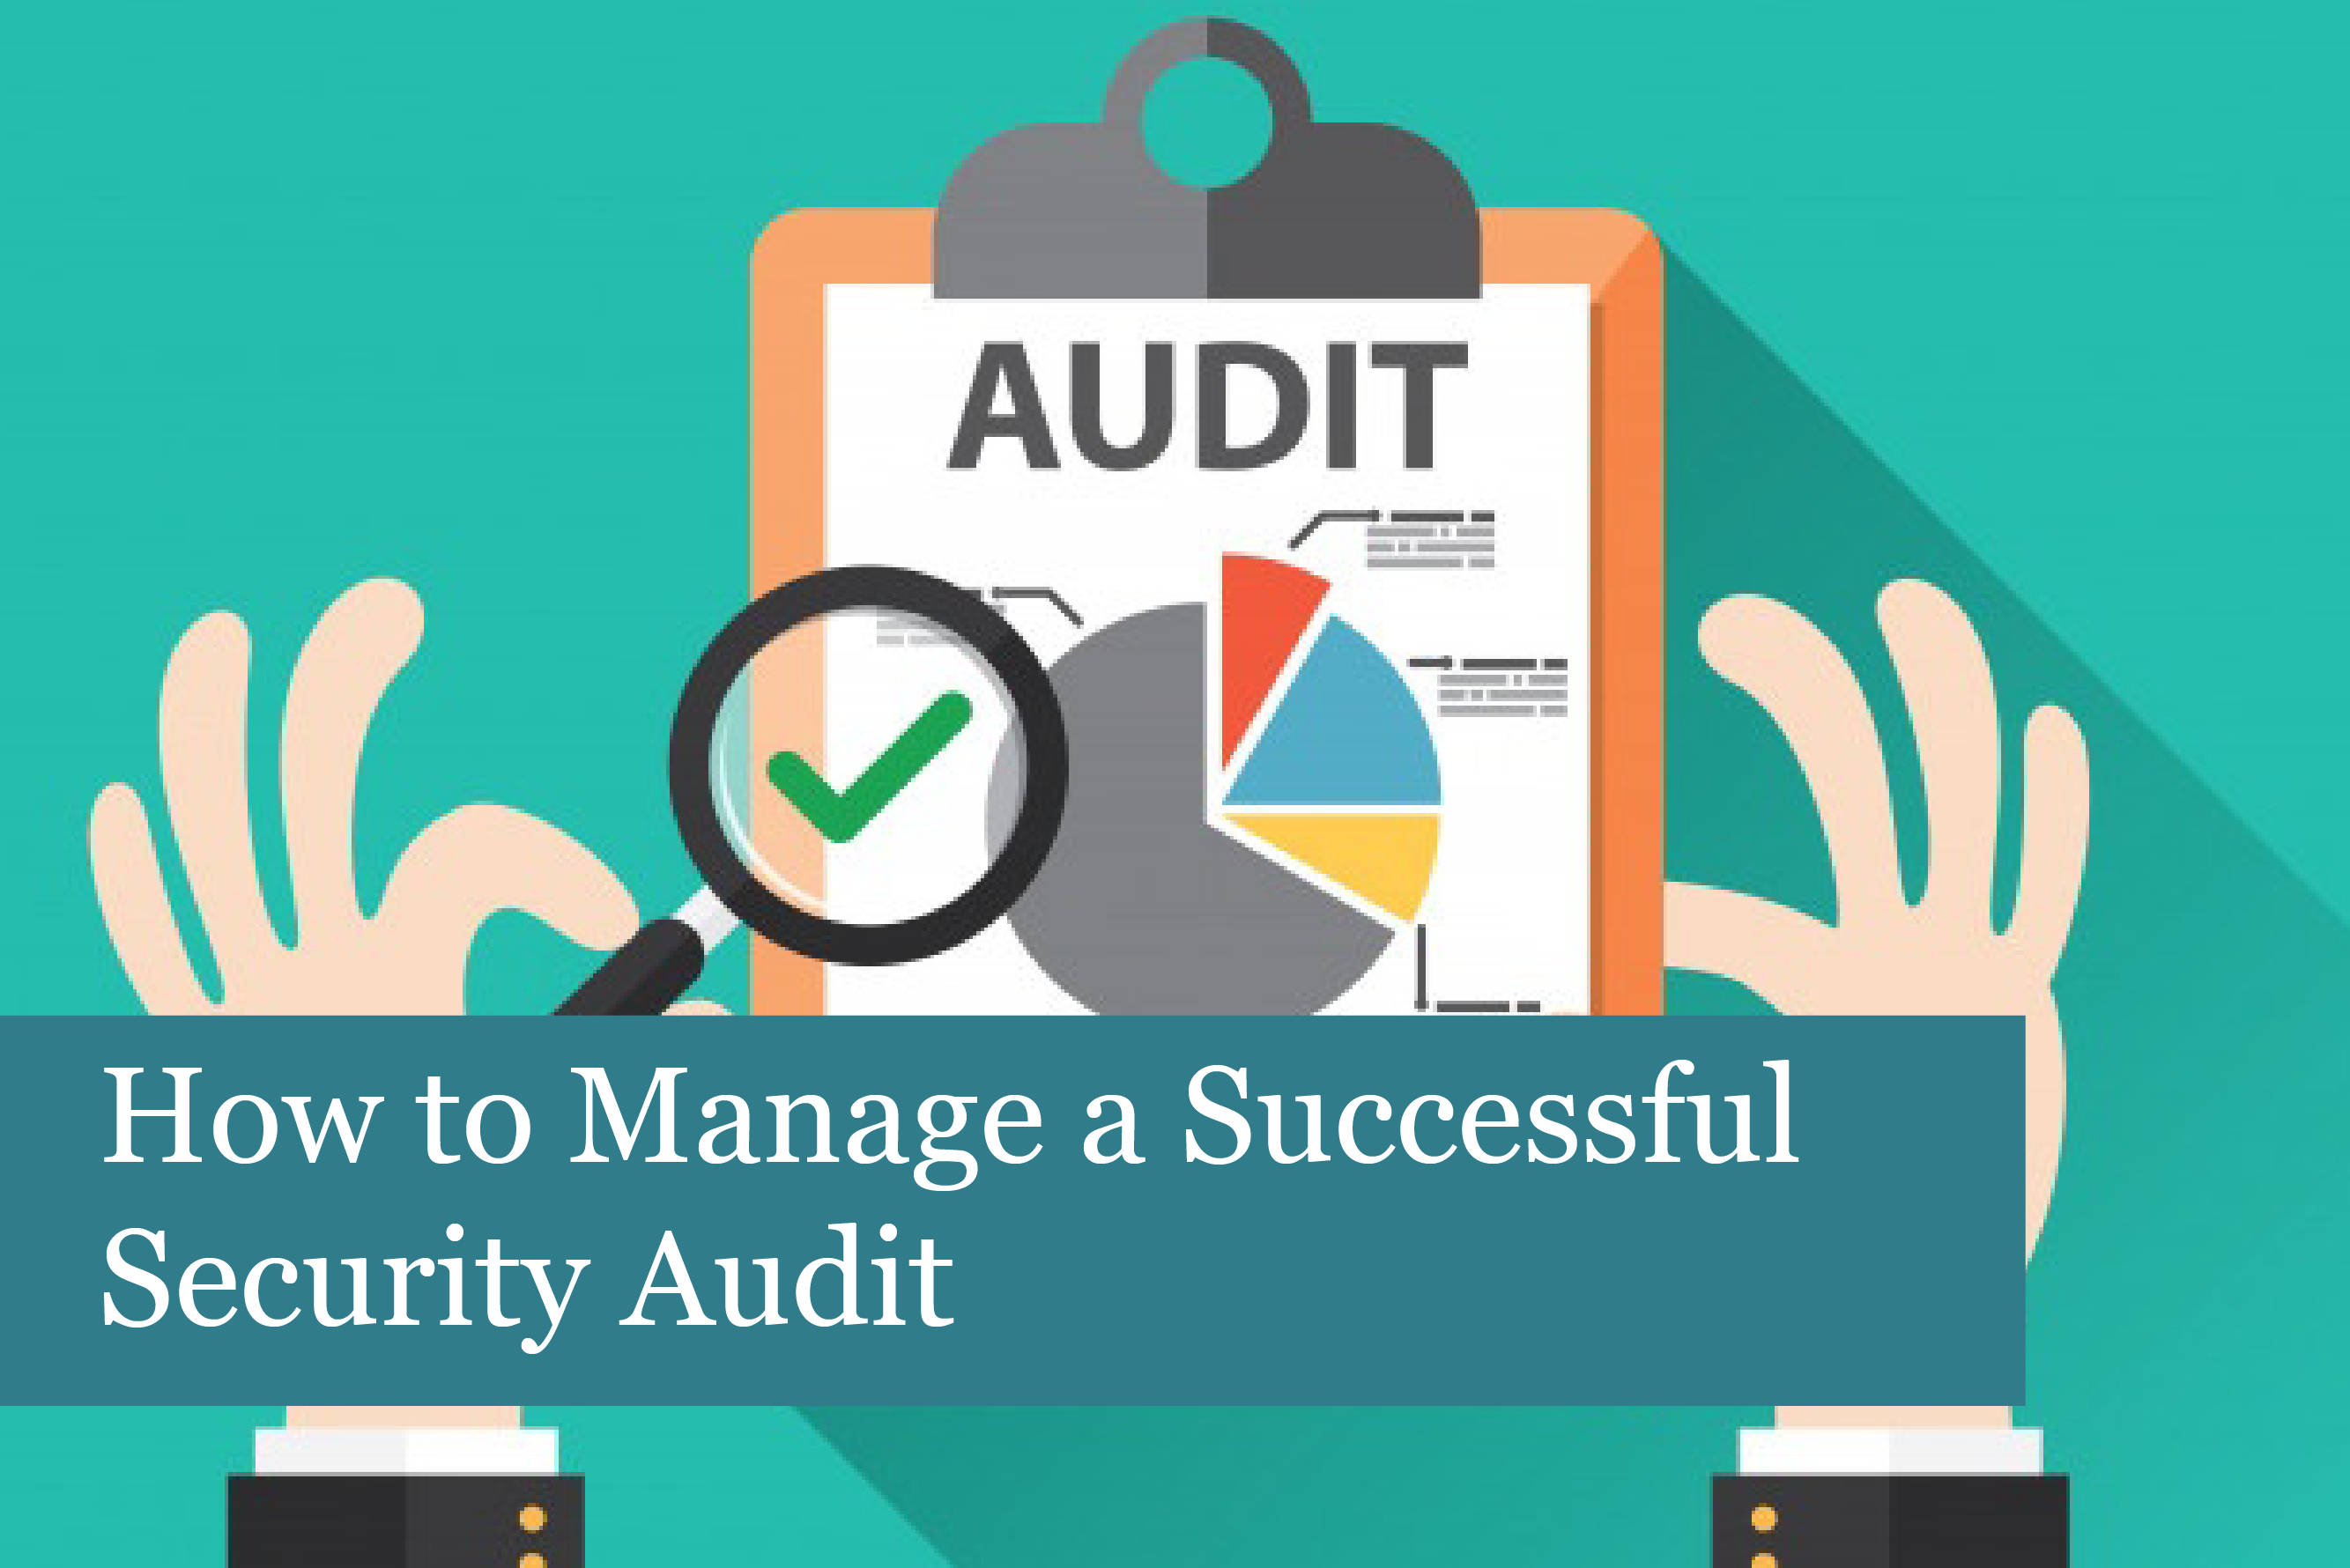 How to Manage a Successful Security Audit